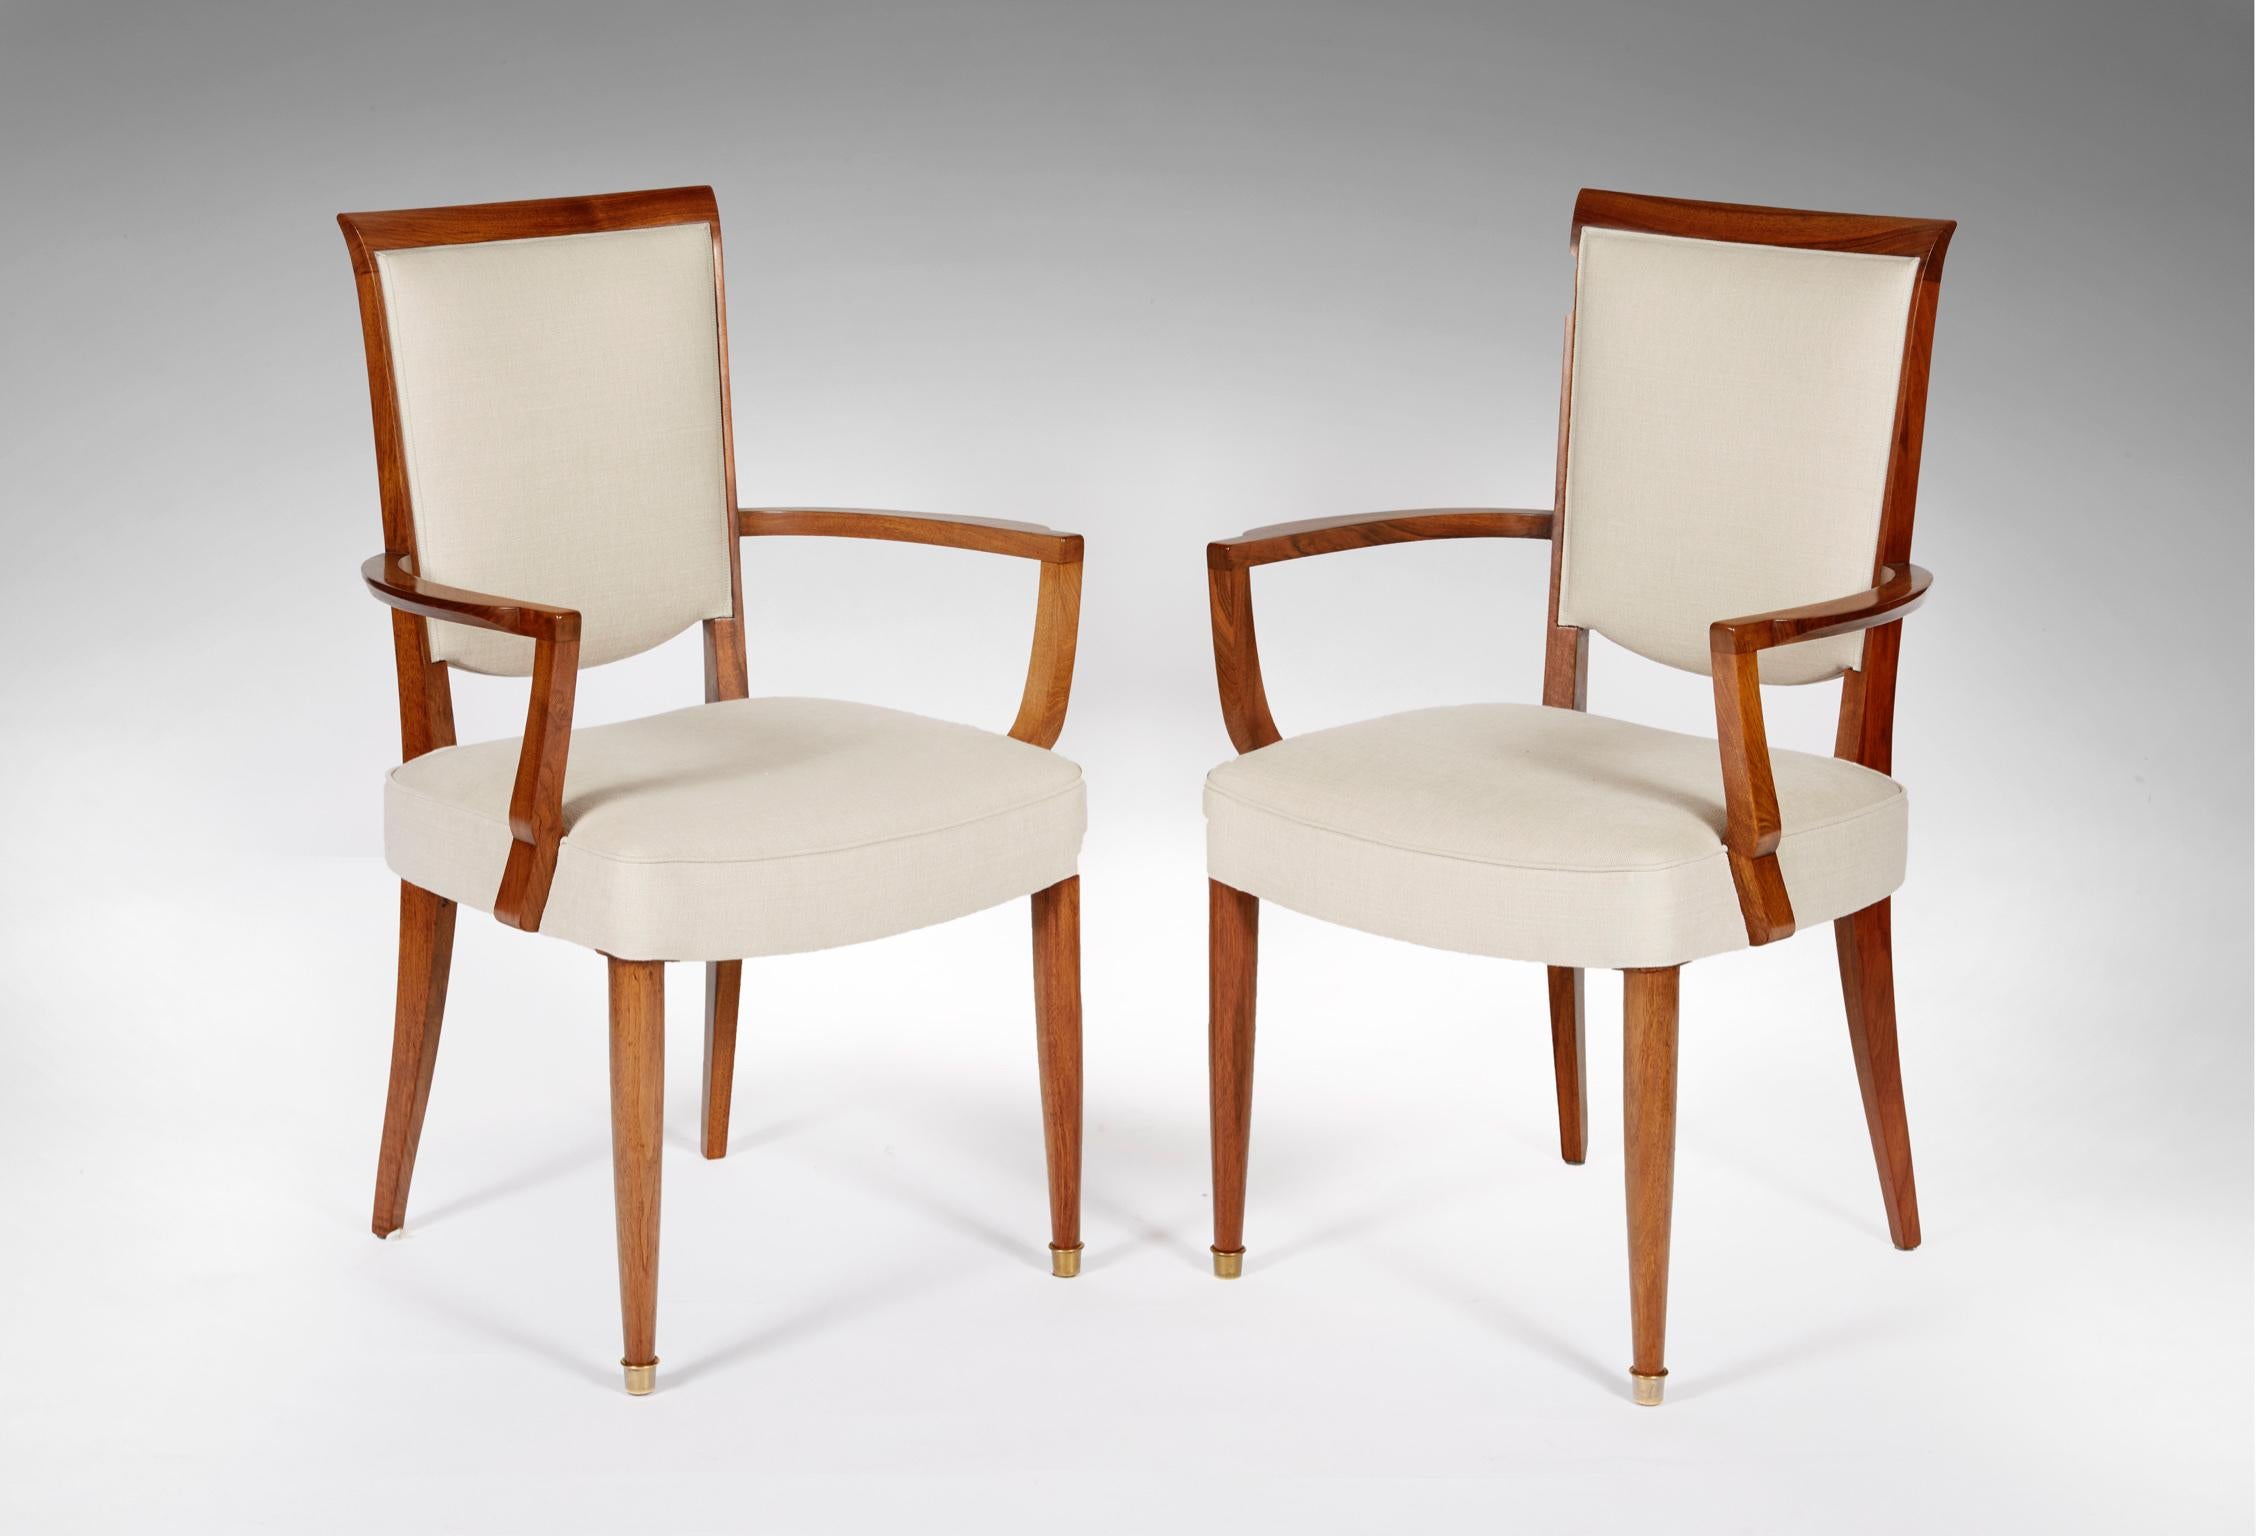 In wood veneer with a slightly inclined backrest resting on a sabre base, the front legs with brass sabots. Covered with a cream fabric.
Measures: Chair: H 37.4 - W 19.8 - D 19.3 in
Armchair: H 37.4 - W 22.8 - D 19.3 in.